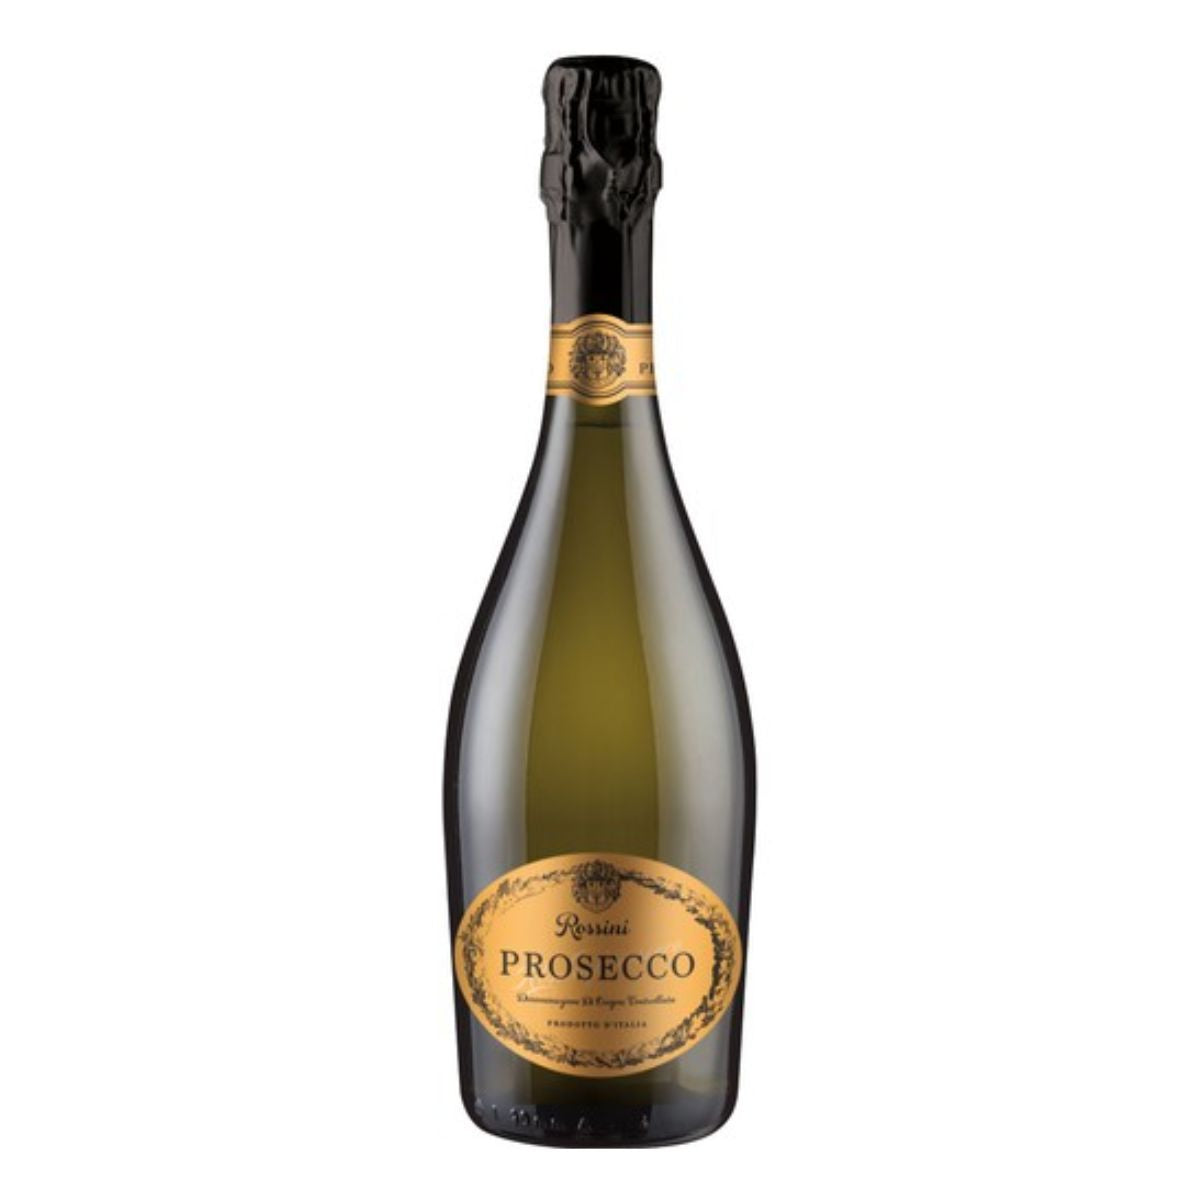 A bottle of Rossini - Prosecco - 750ml on a white background.